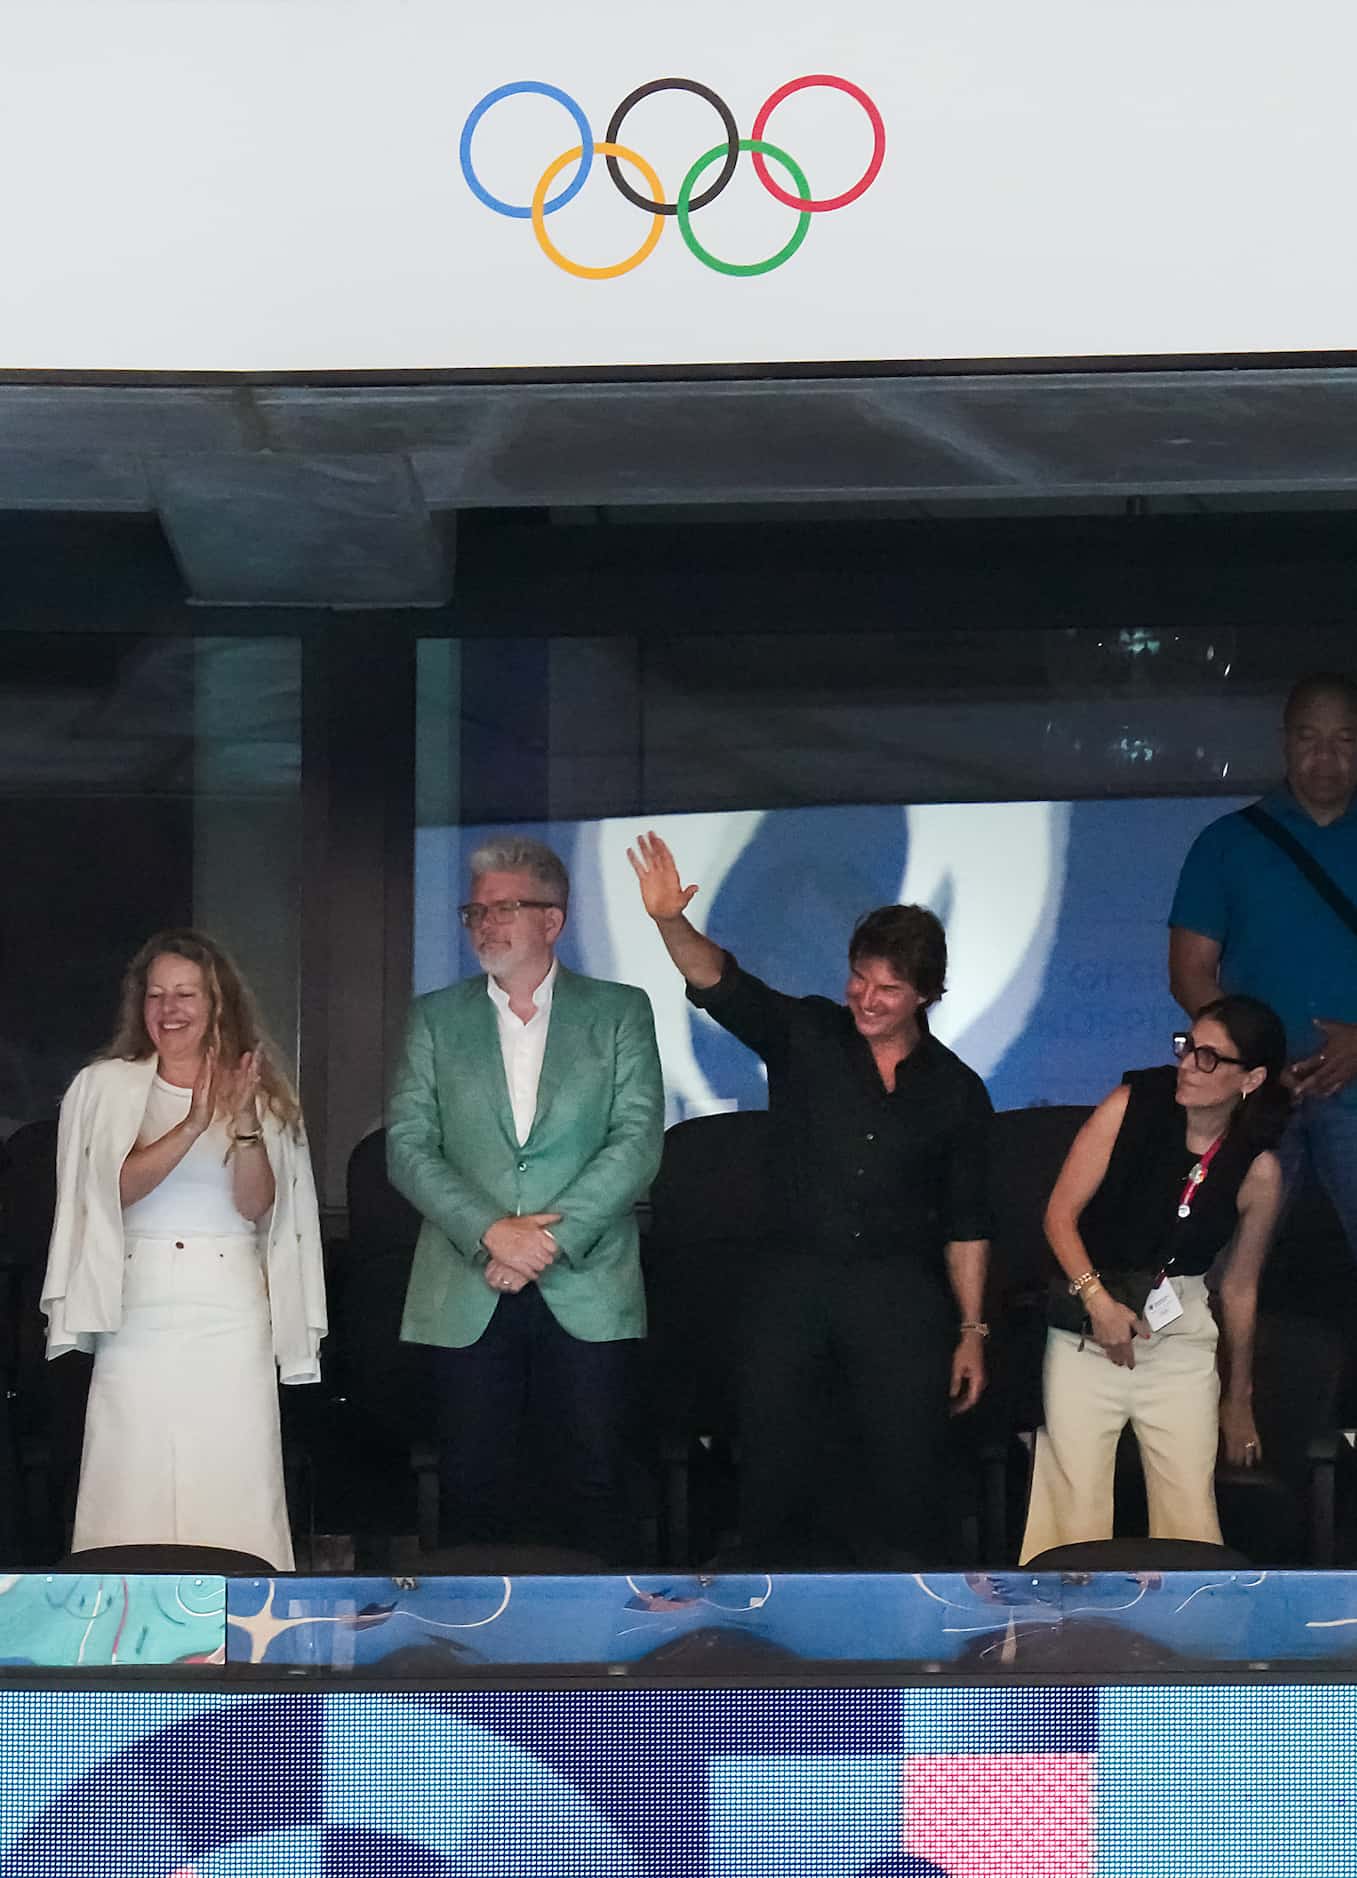 Actor Tom Cruise (center, right) waves to the crowd as he watches swimming with director...